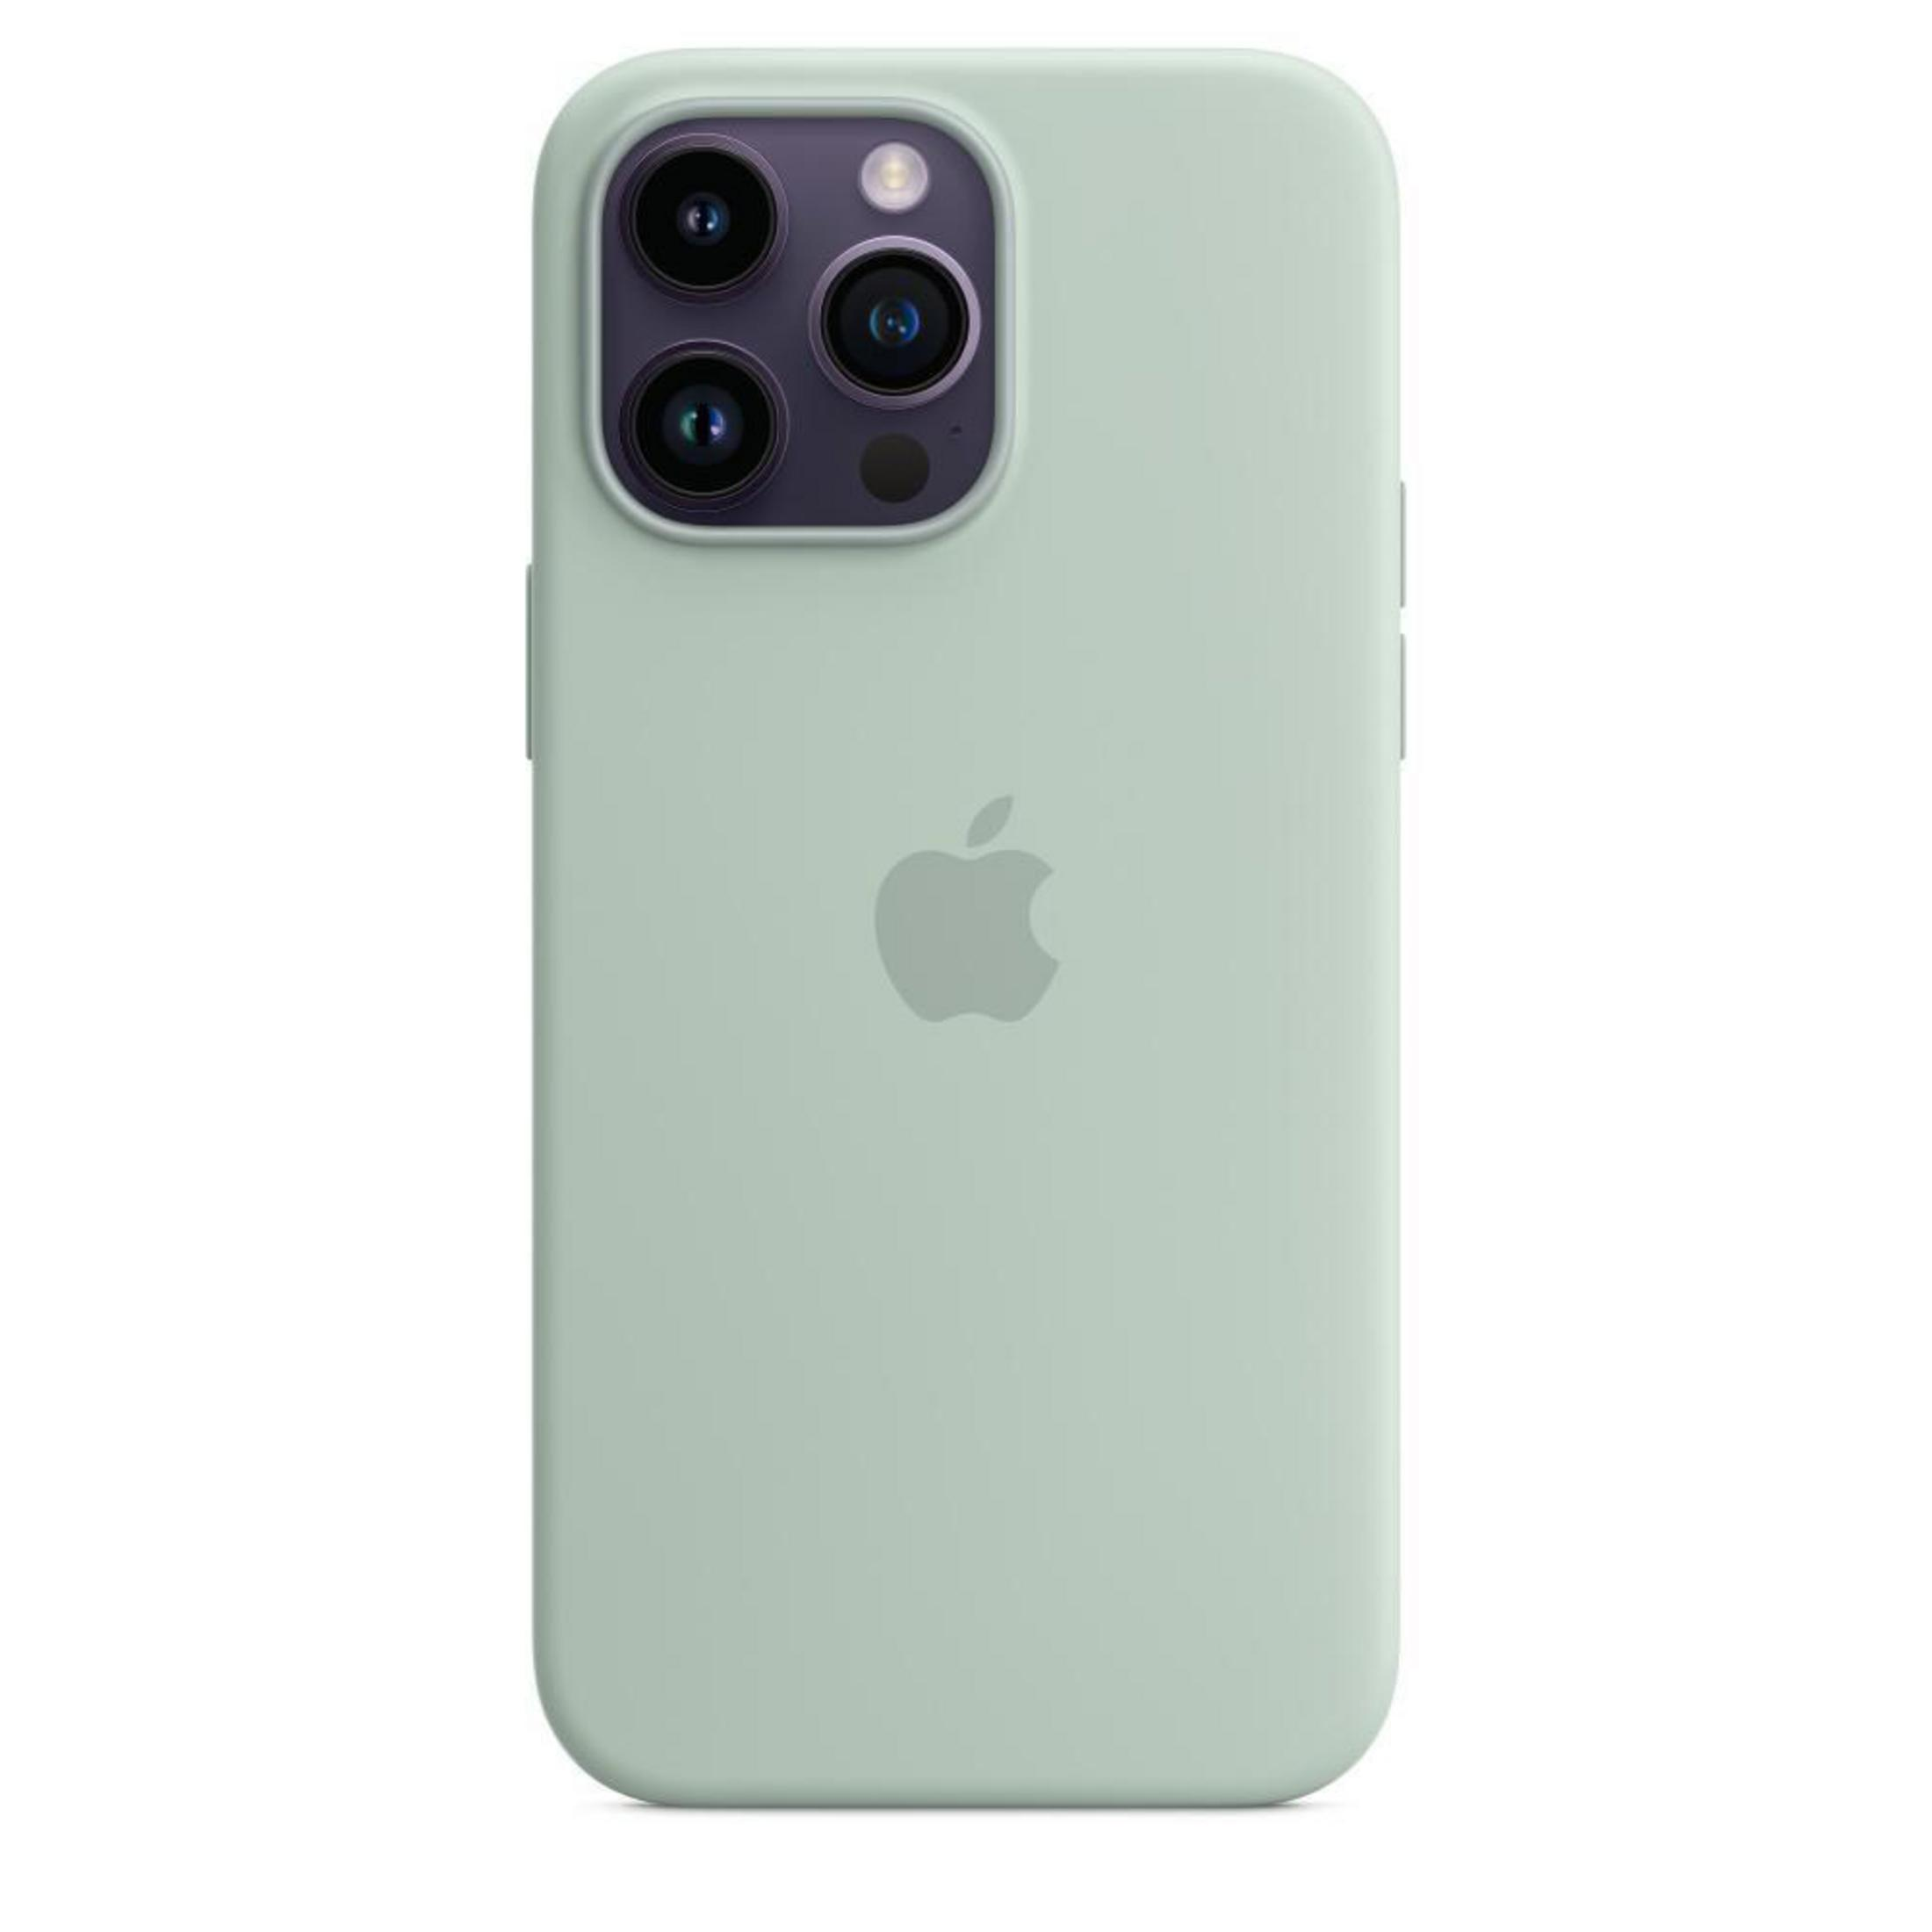 SIL iPhone SUCCUL, Agavengrün 14 MPTY3ZM/A Backcover, Max, IP14PROMAX APPLE Pro Apple, CASE MS